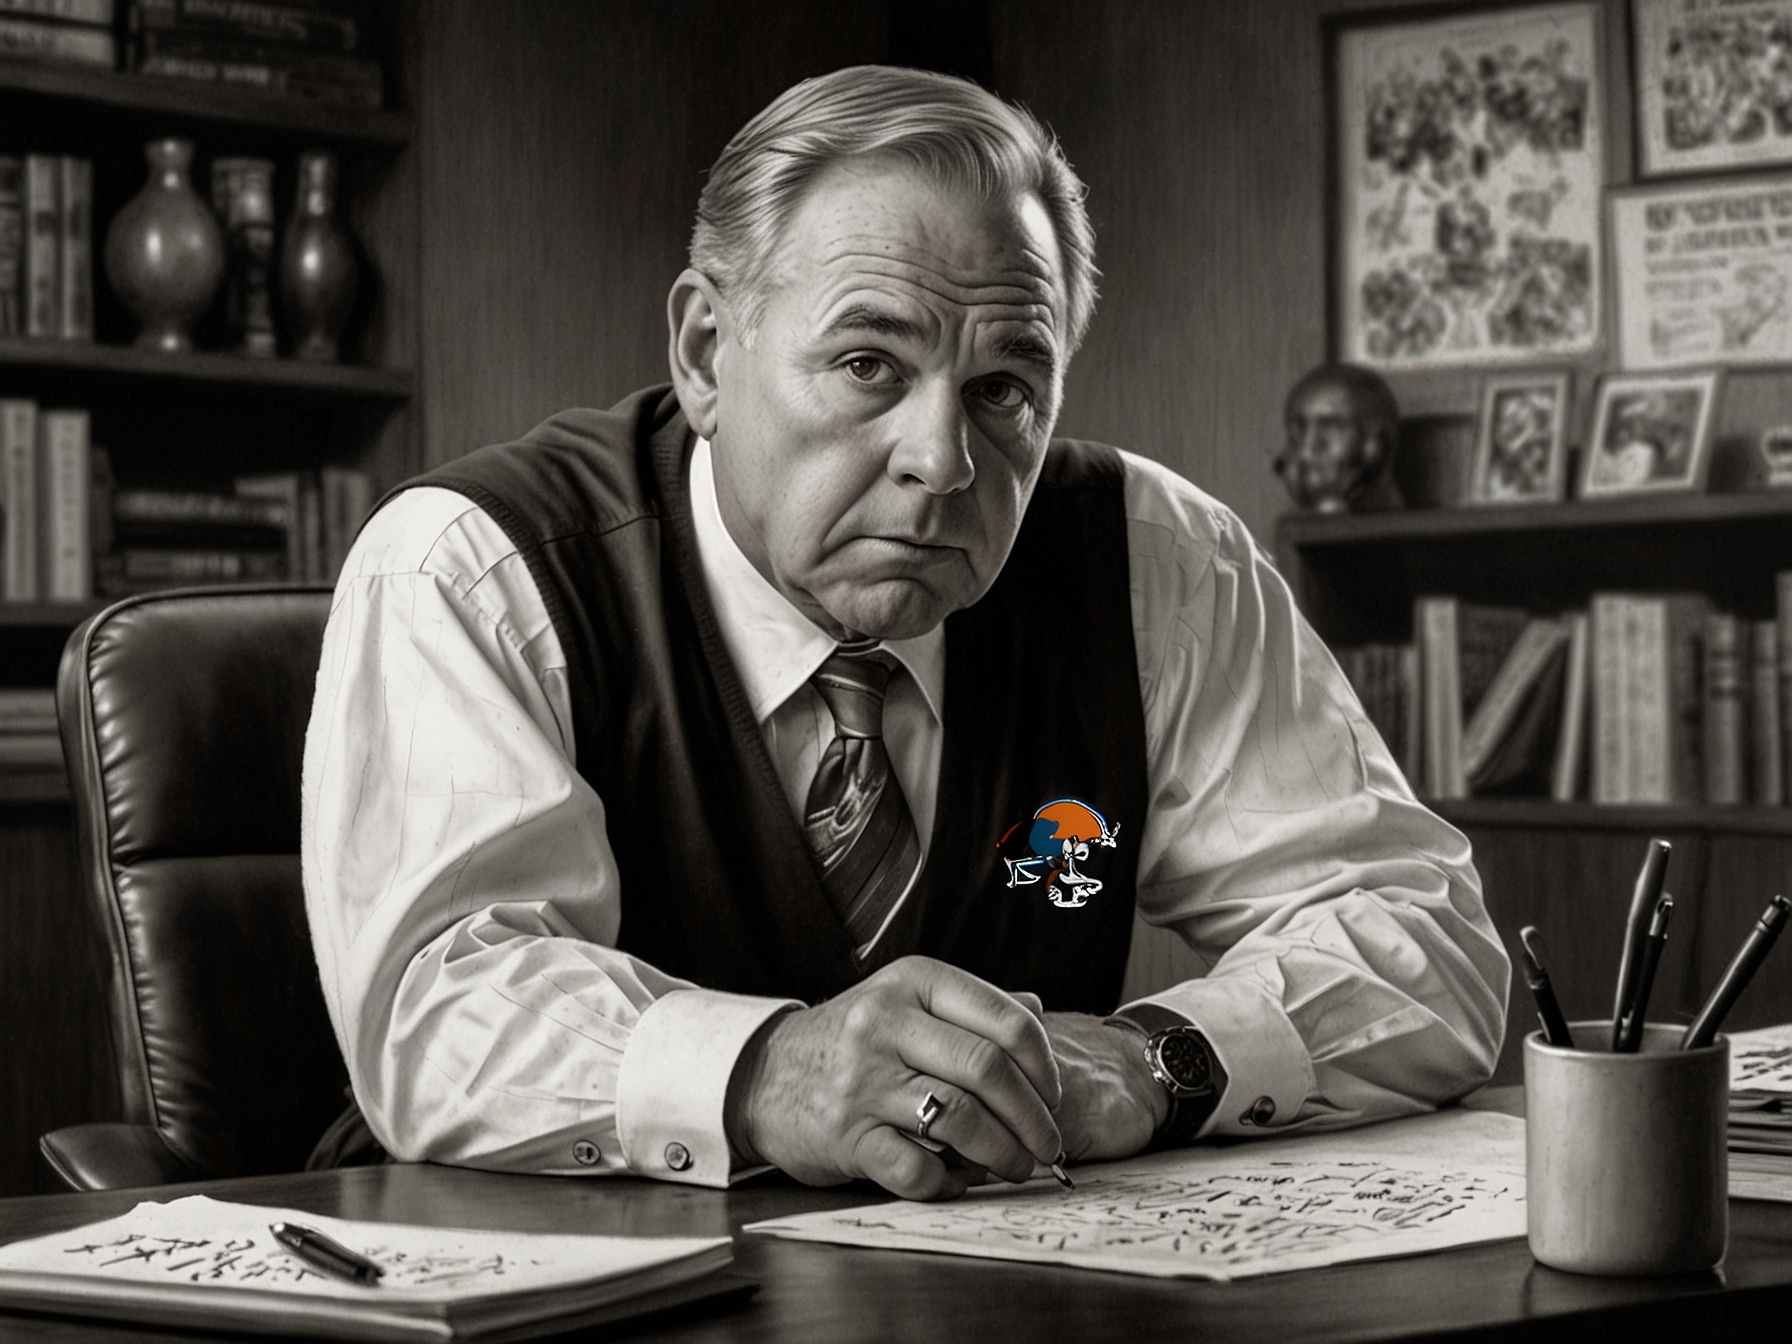 A scene from Draft Day showing Sonny Weaver, the general manager of the Cleveland Browns, intensely negotiating during the NFL Draft, capturing the drama and tension of the process.